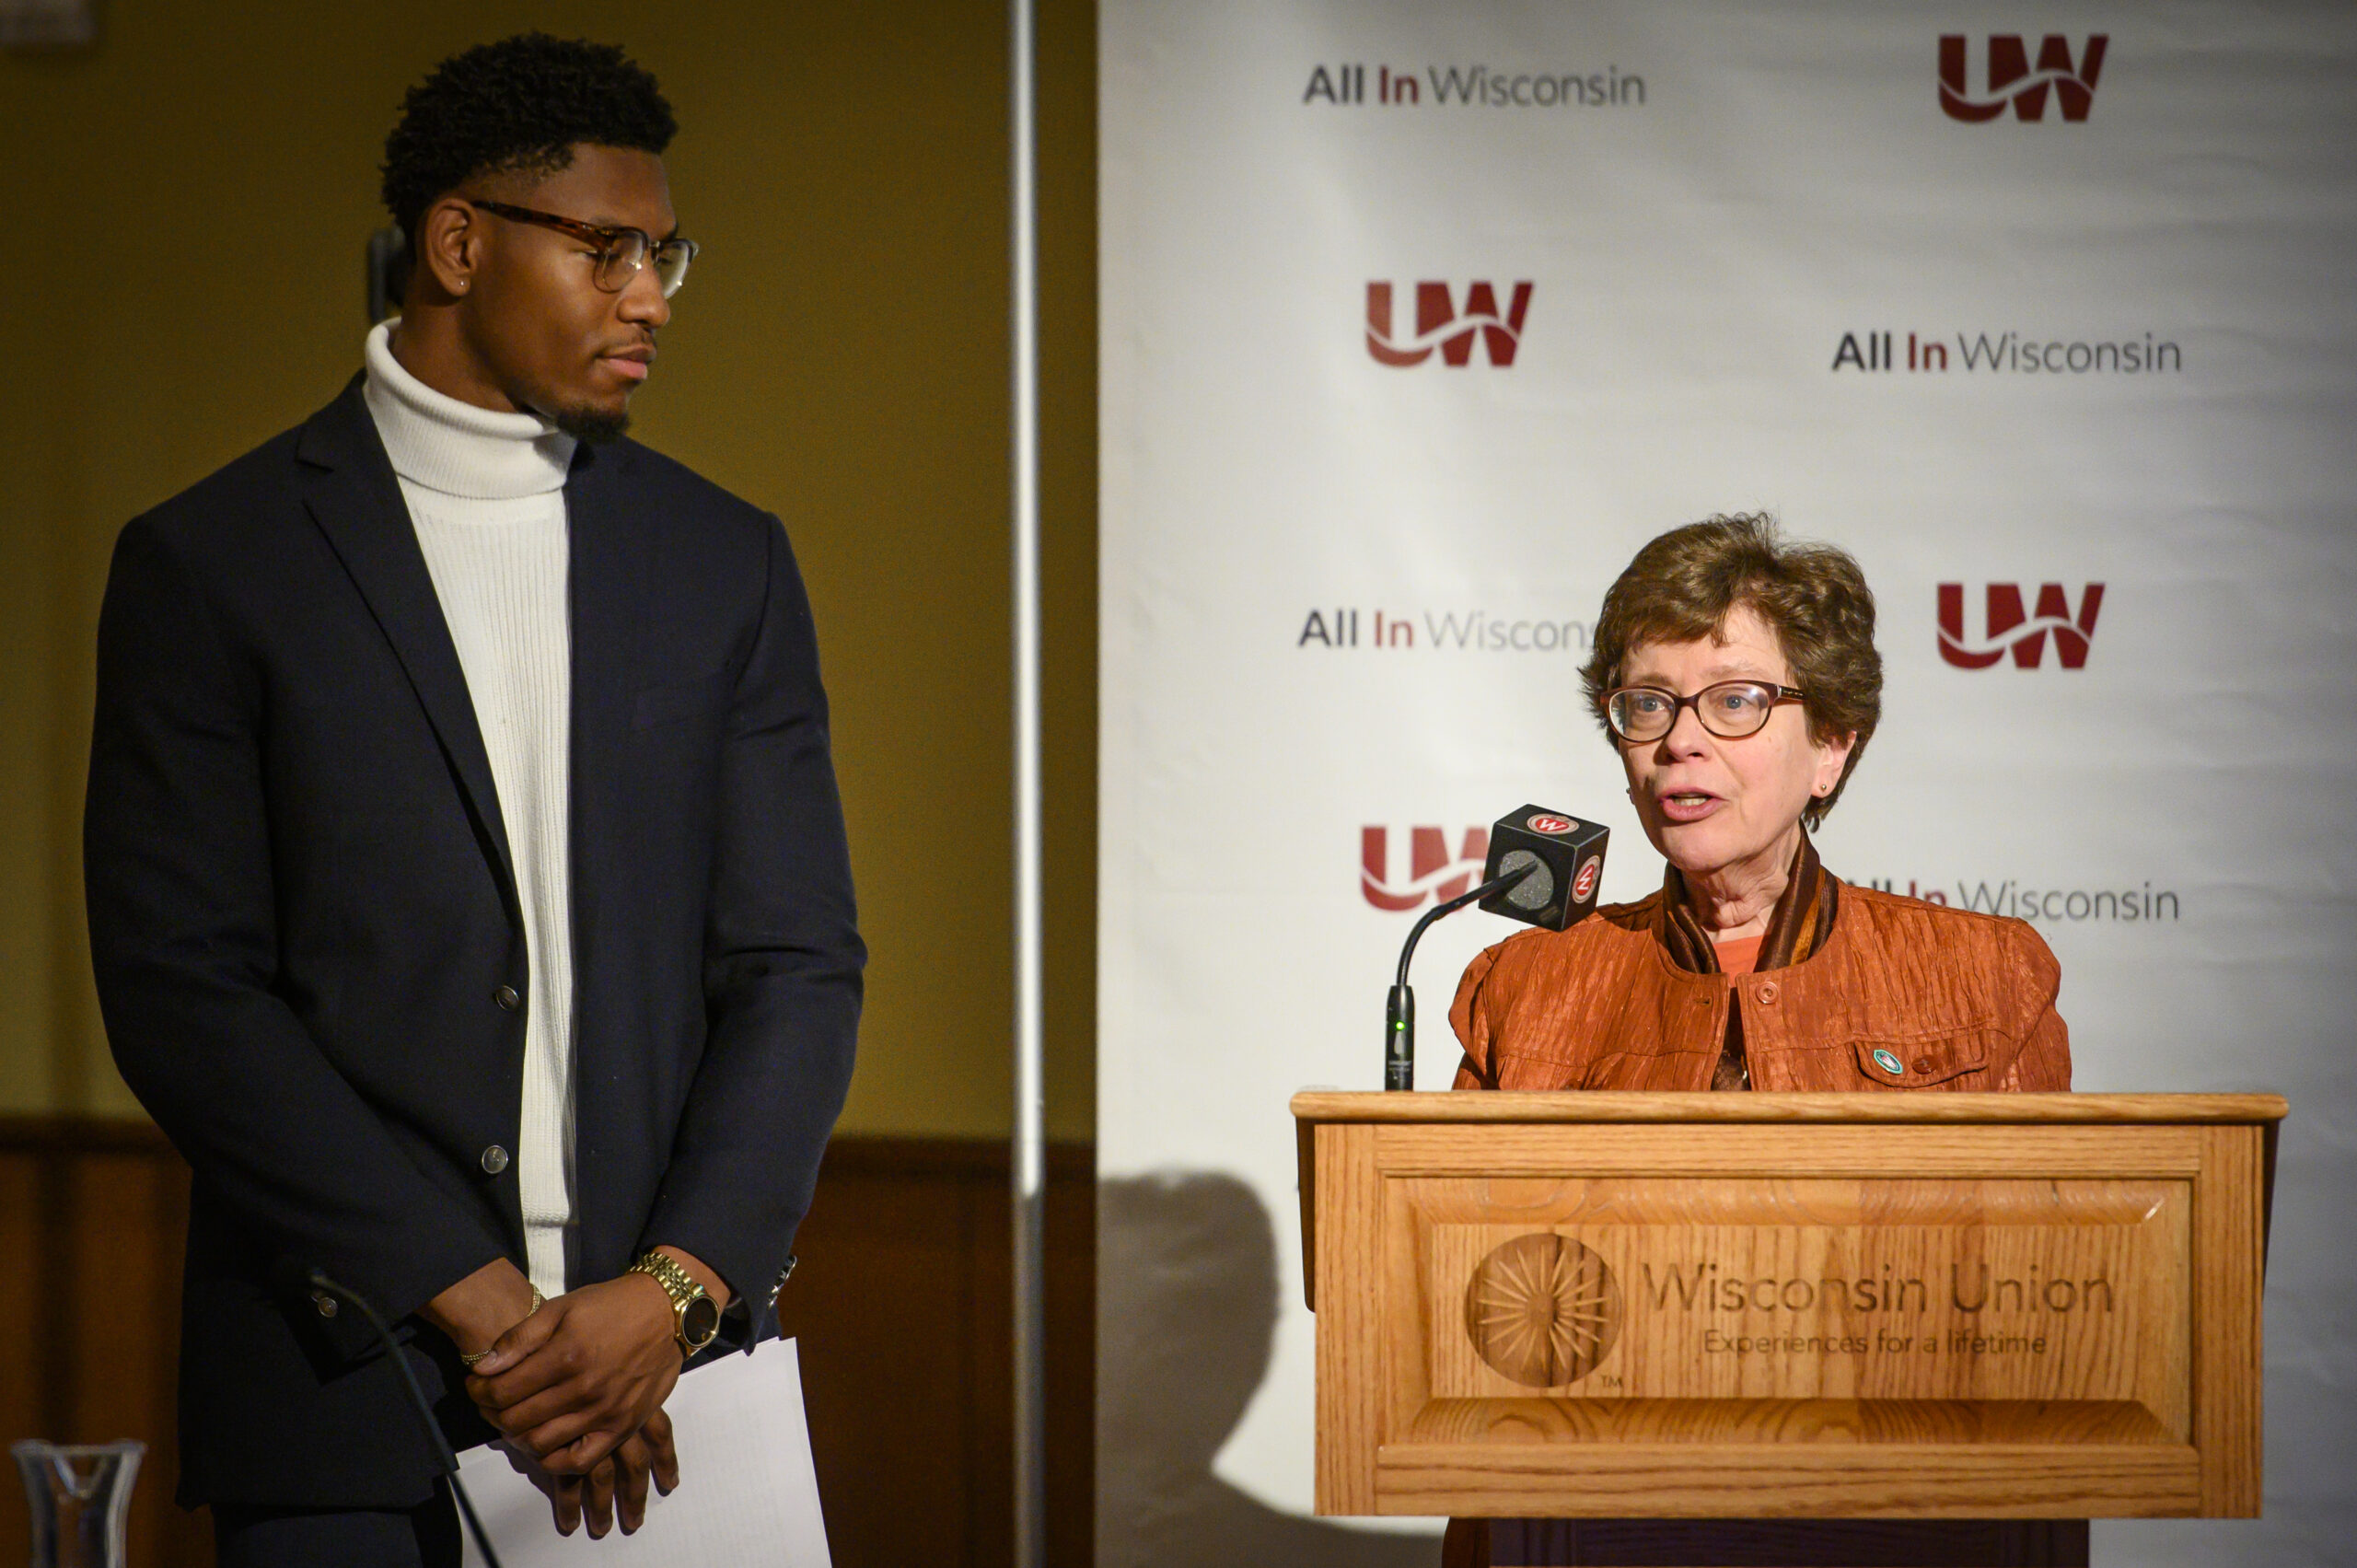 Chancellor Rebecca Blank stands at a podium speaking into a microphone with a student standing next to her.